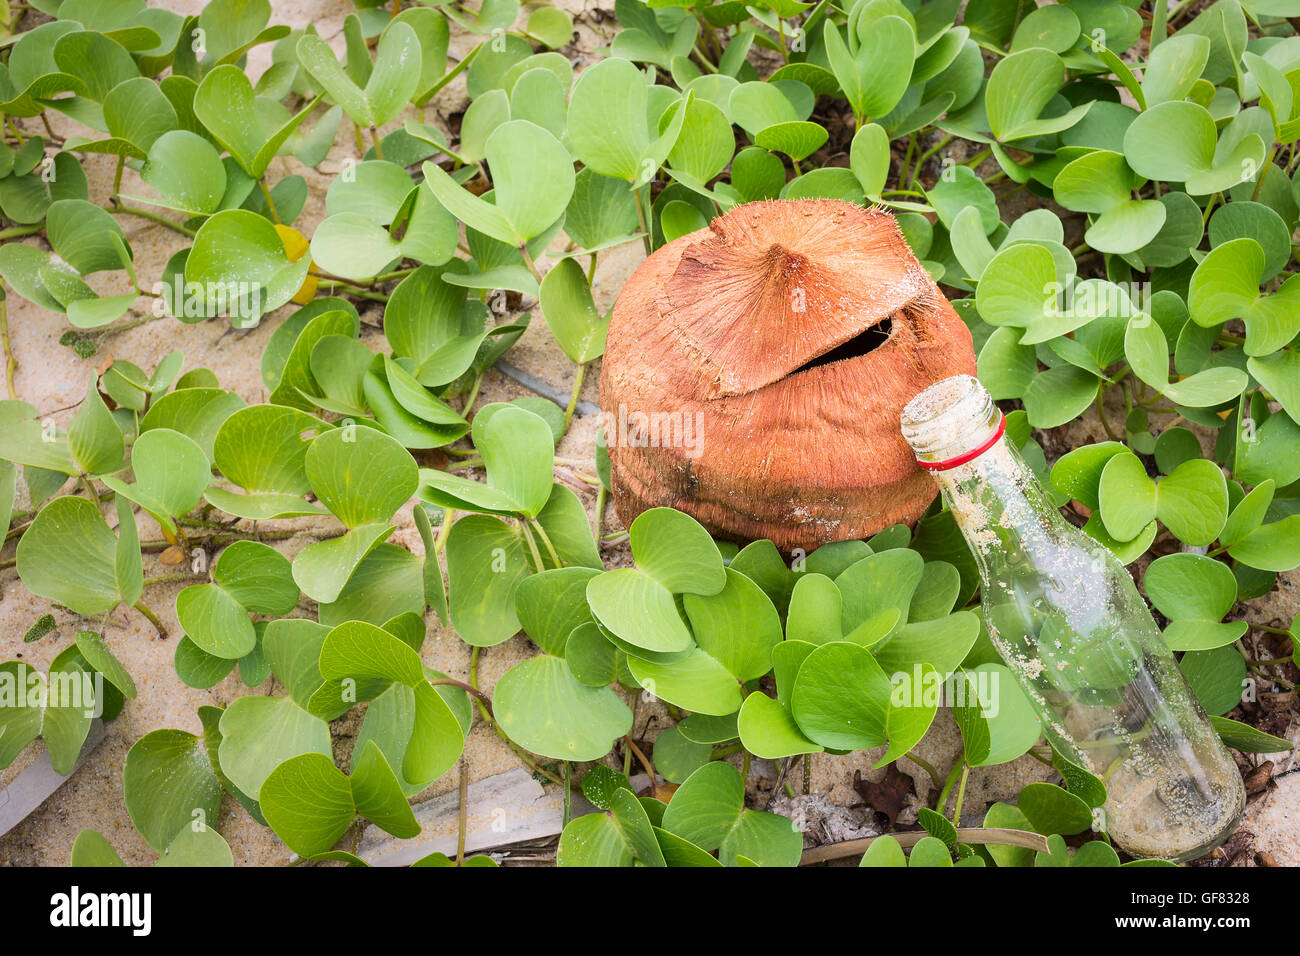 Ipomoea pes-caprae plant or Goat's Foot Creeper with the bottle , save the earth concept backgroud Stock Photo